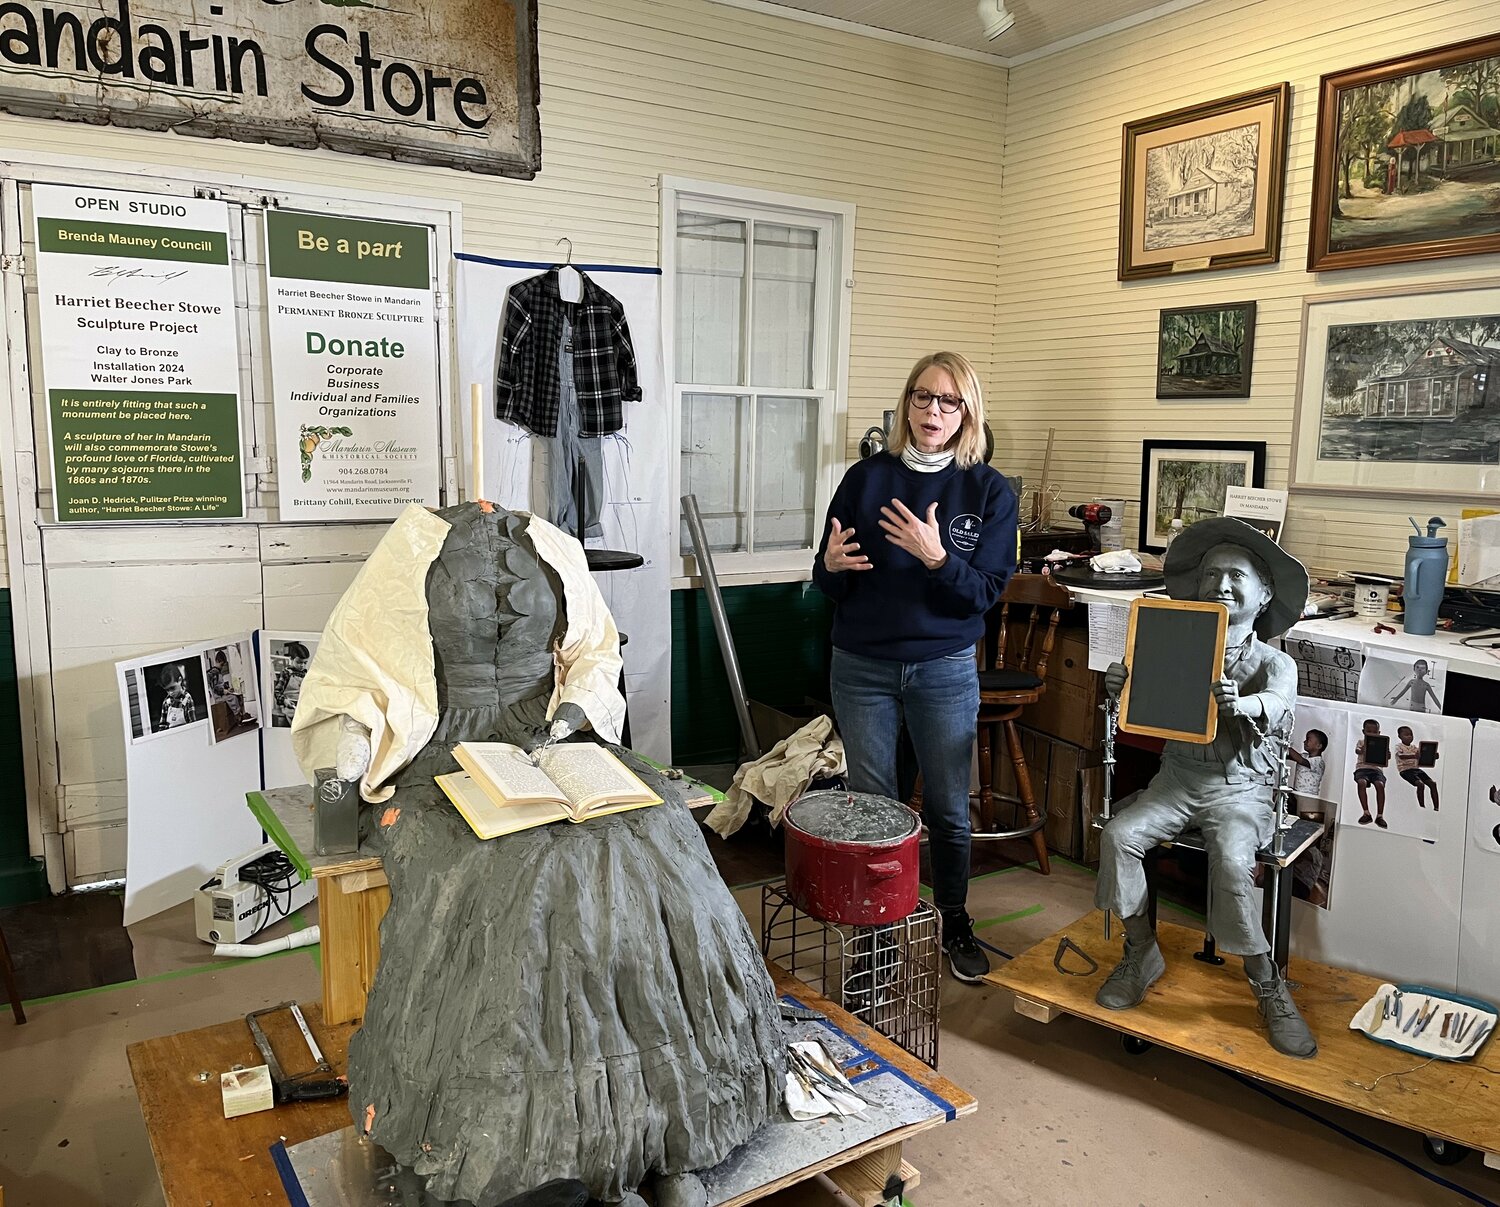 Artist Brenda Councill talks about the process of creating the life-sized sculpture of Harriet Beecher Stowe.